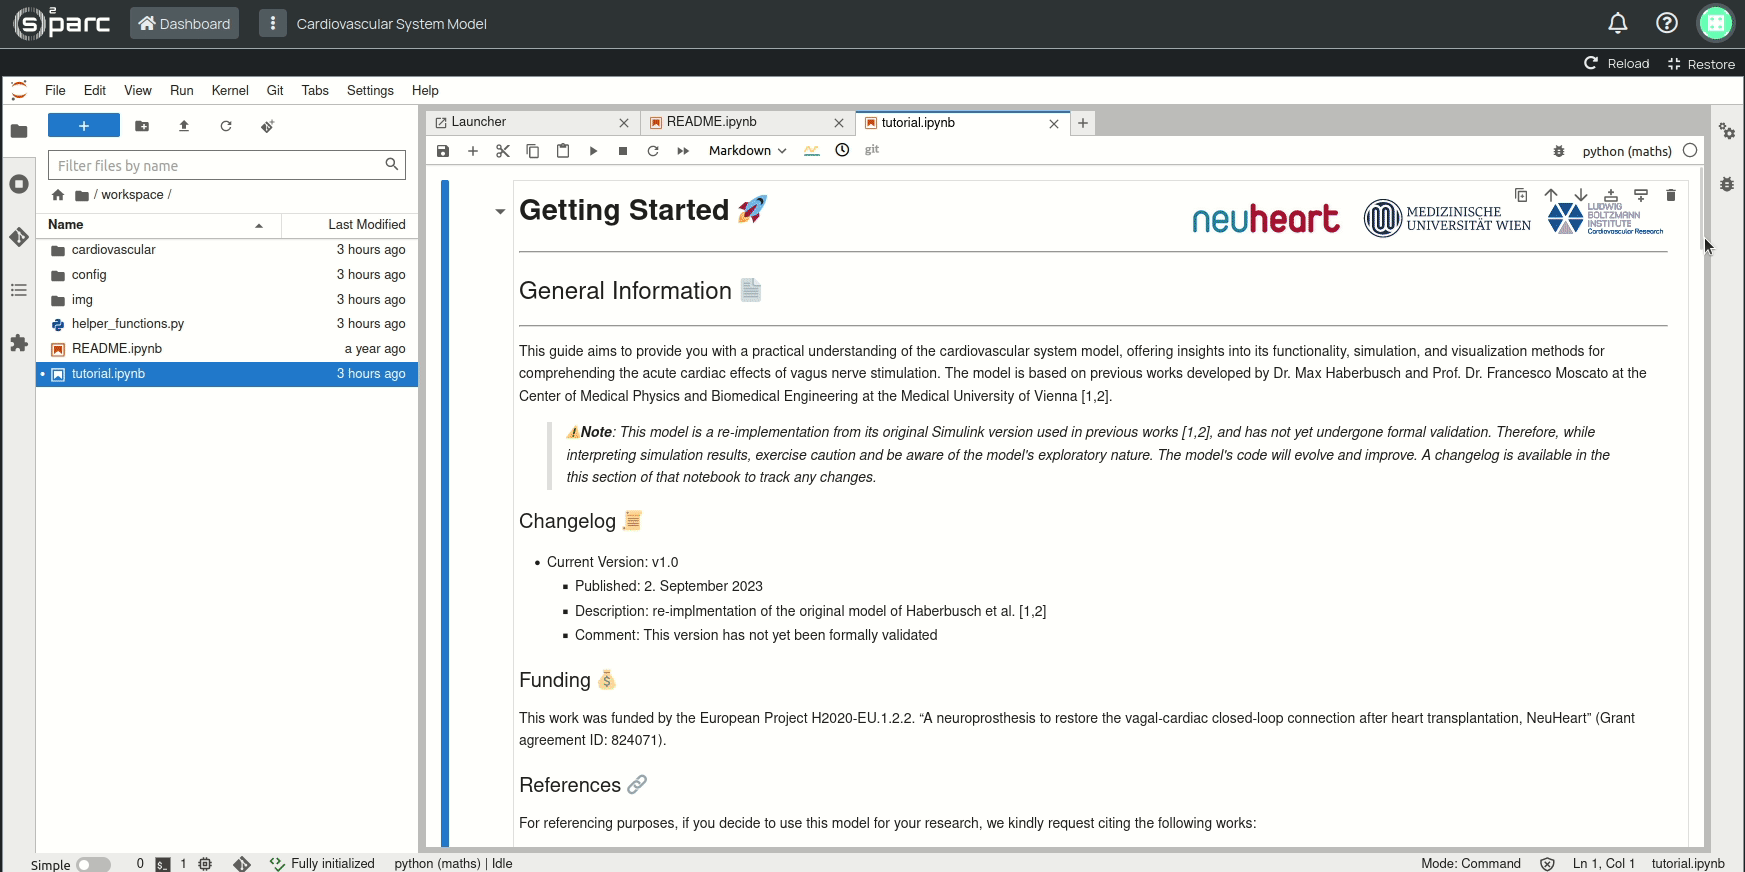 Figure 3: Jupyter Notebook with documentation and code to execute